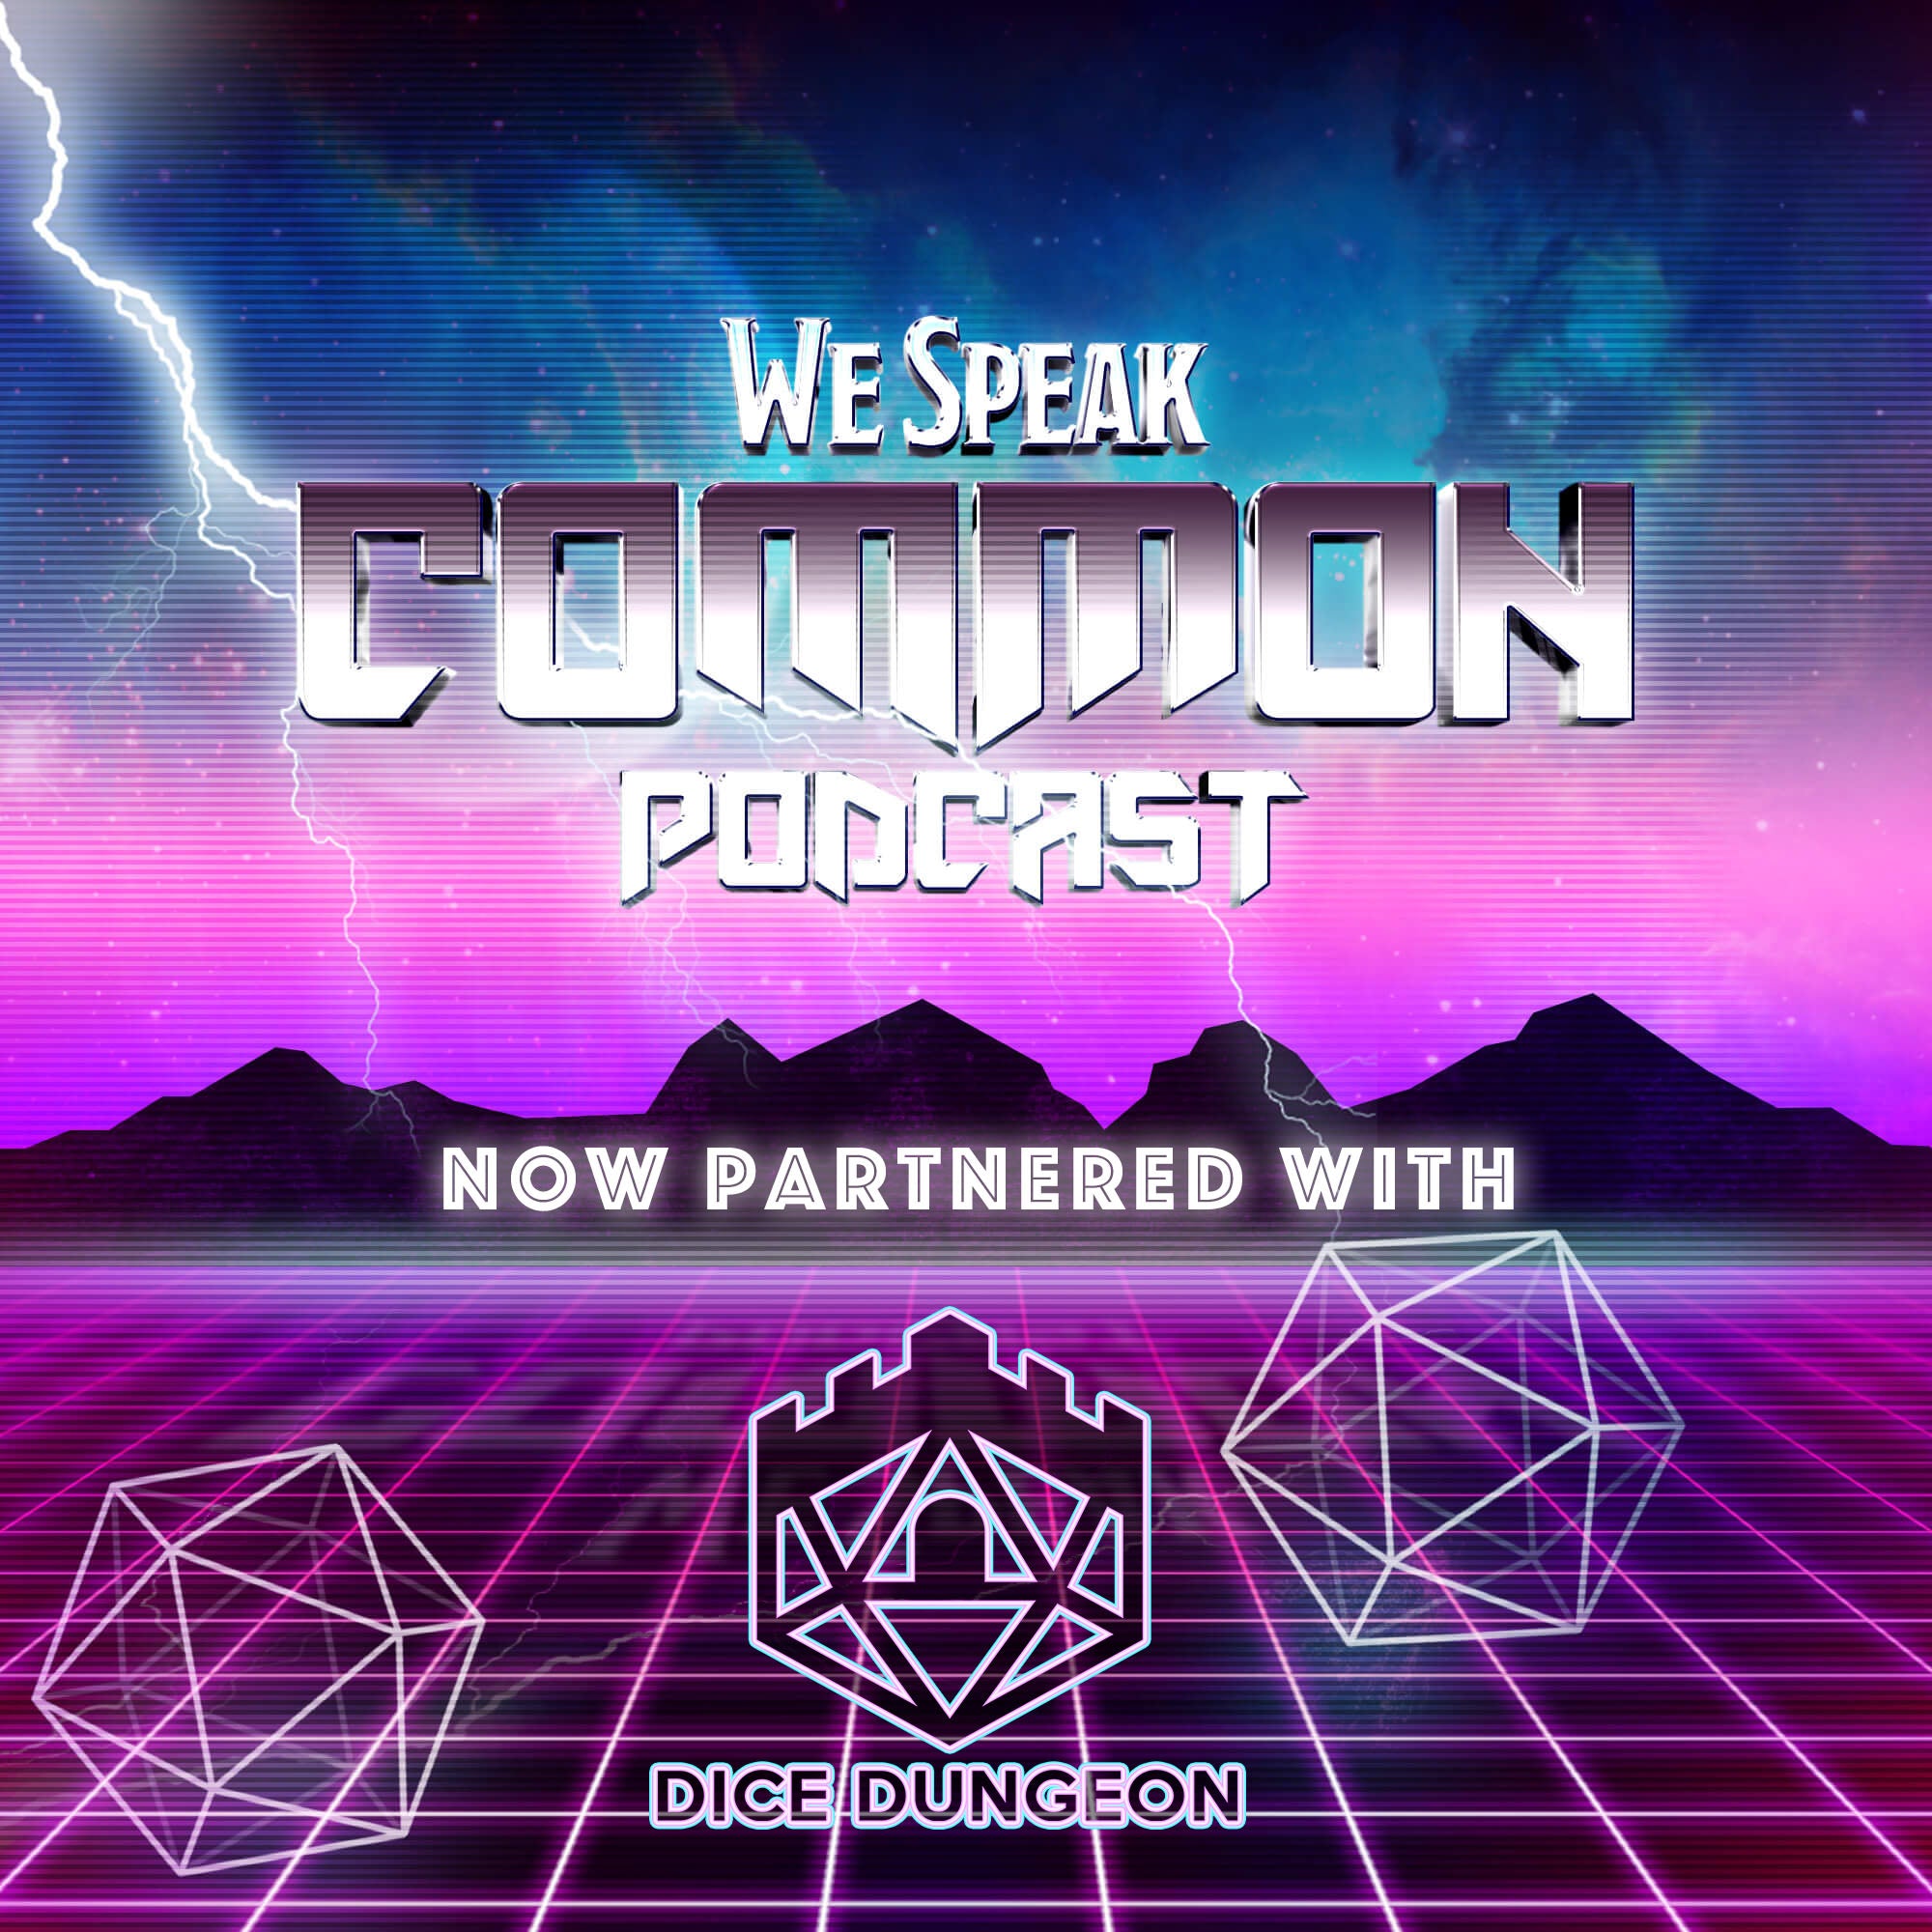 Dice Dungeon & We Speak Common Join Forces!